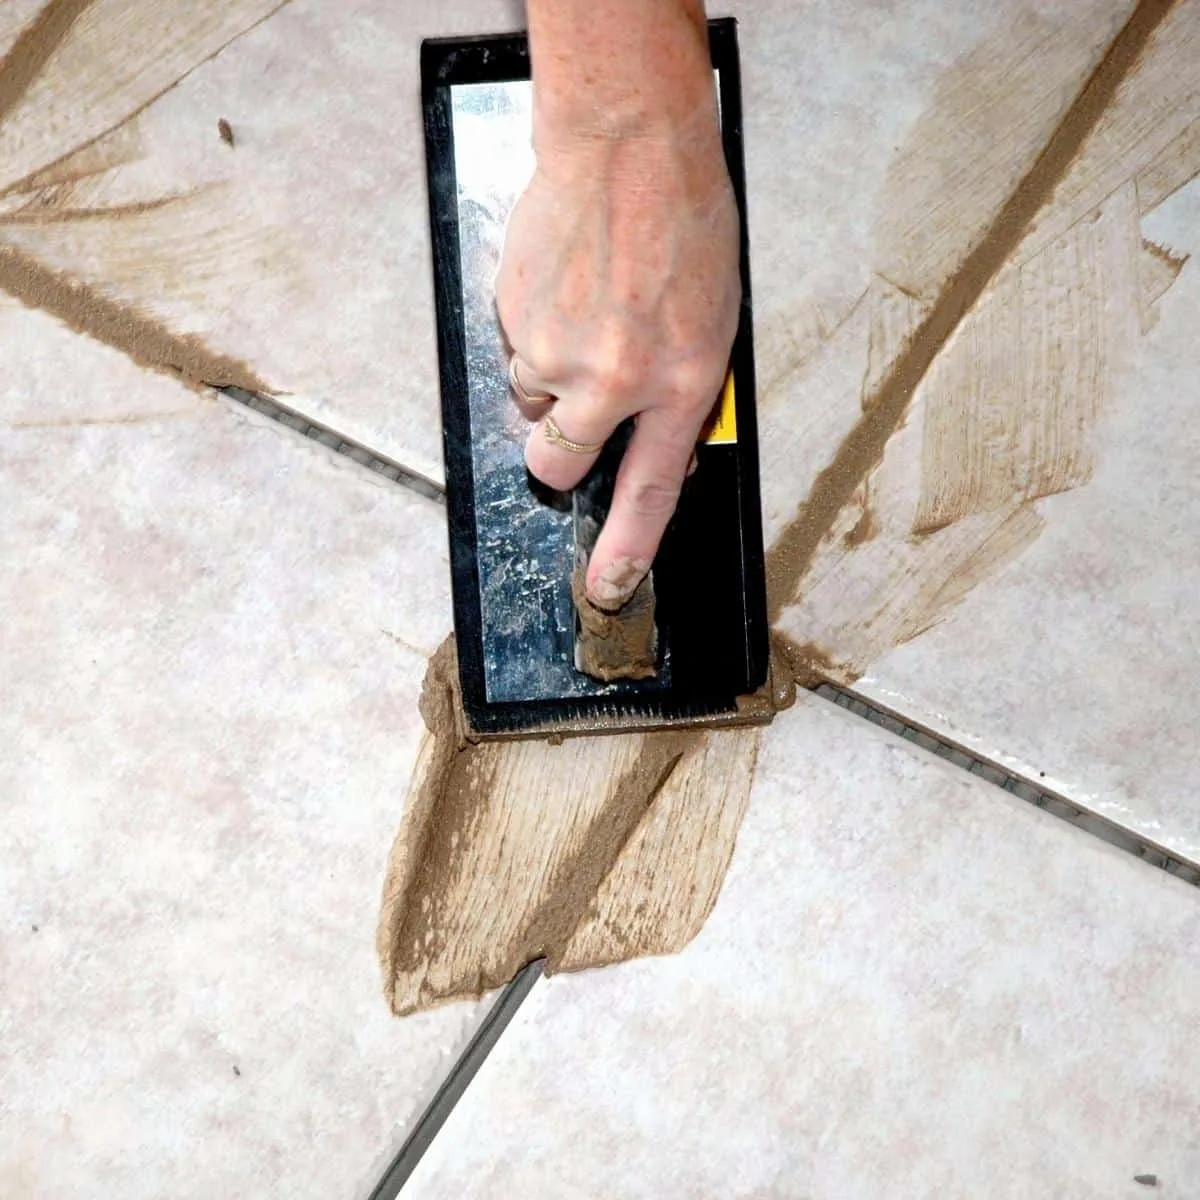 spreading grout with a float